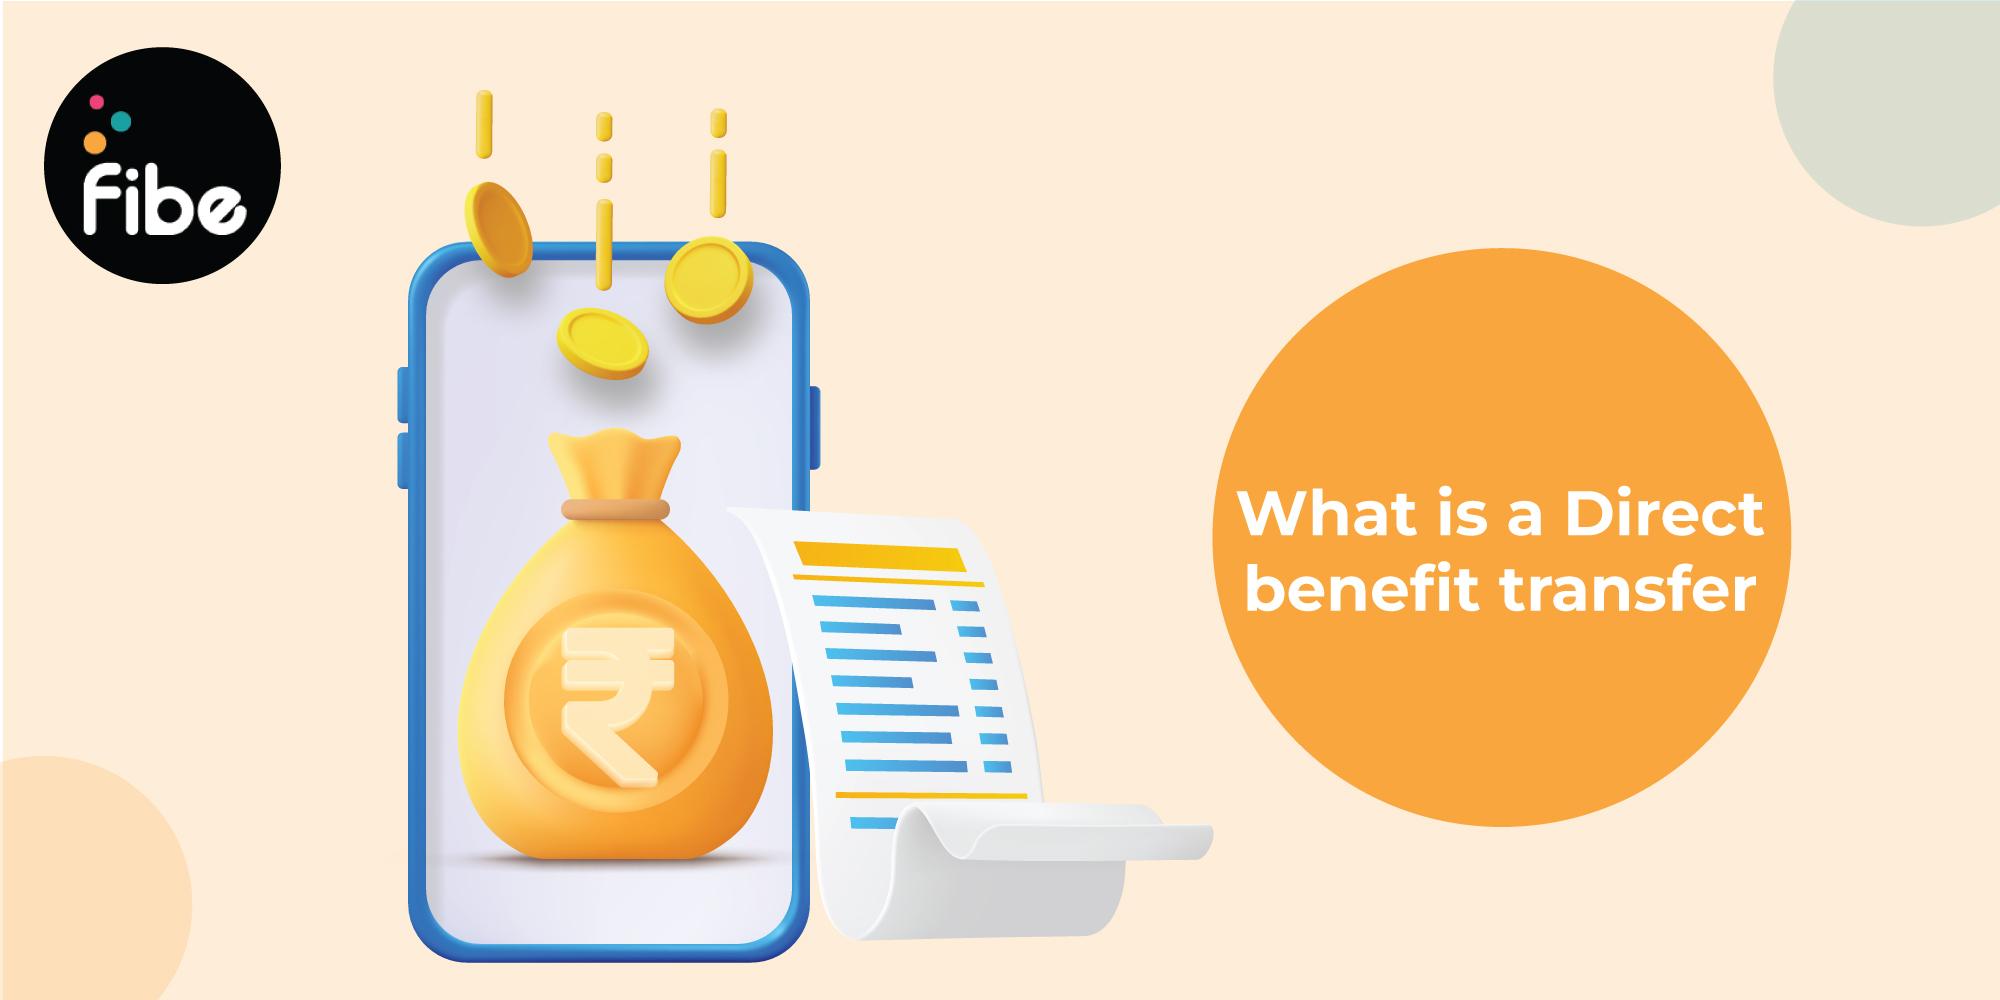 What Is Direct Benefit Transfer Scheme? Know Its Types and Benefits